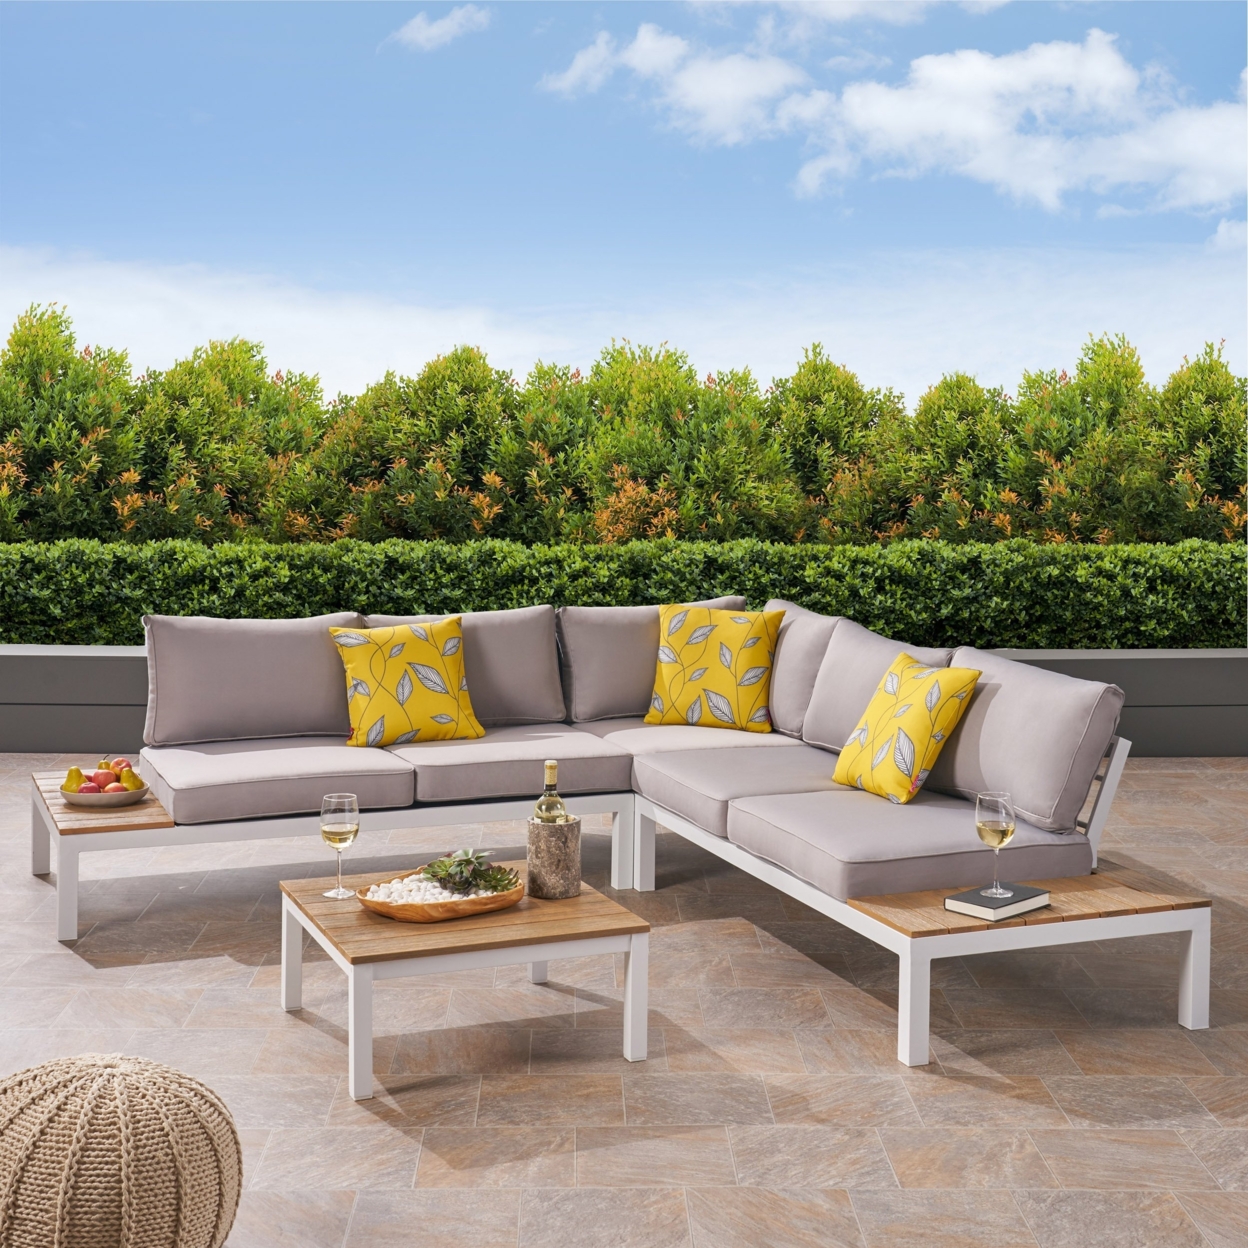 Blessen Outdoor Aluminum And Wood V-Shaped Sofa Set With Cushions - Light Gray / White